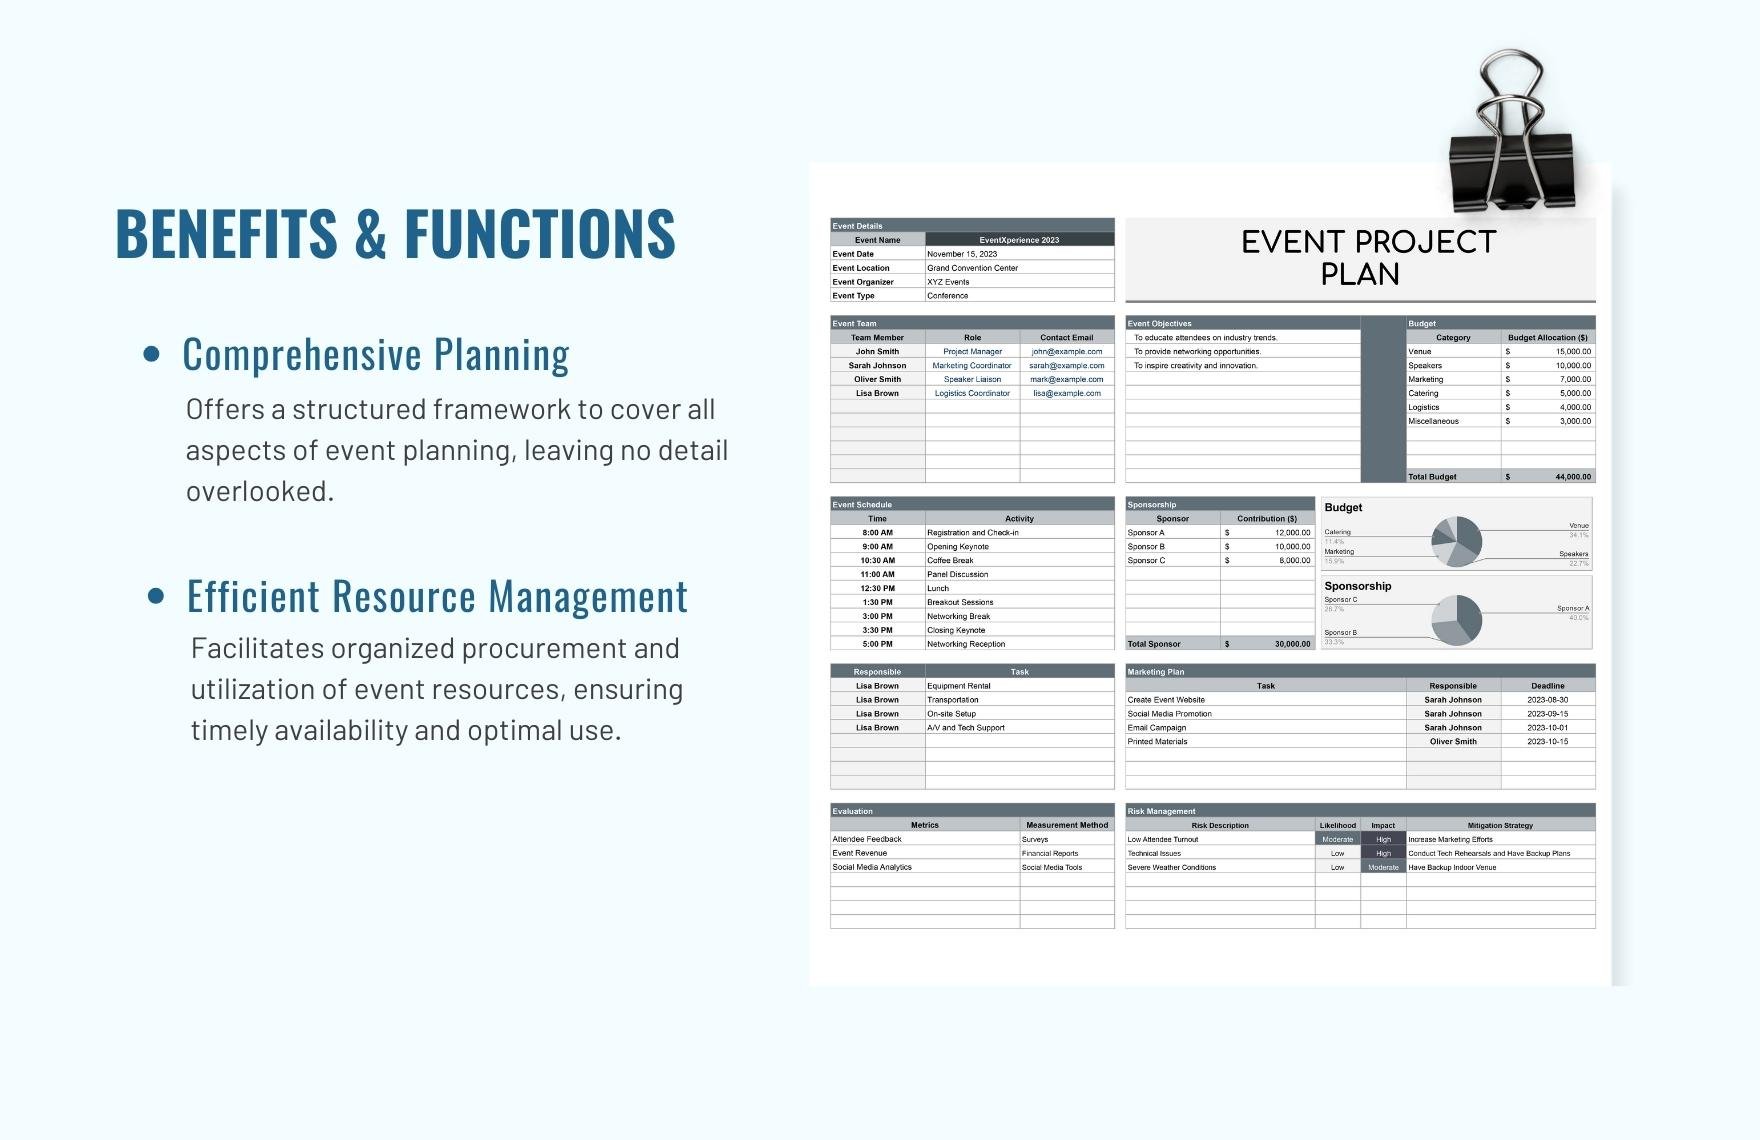 Event Project Plan Template